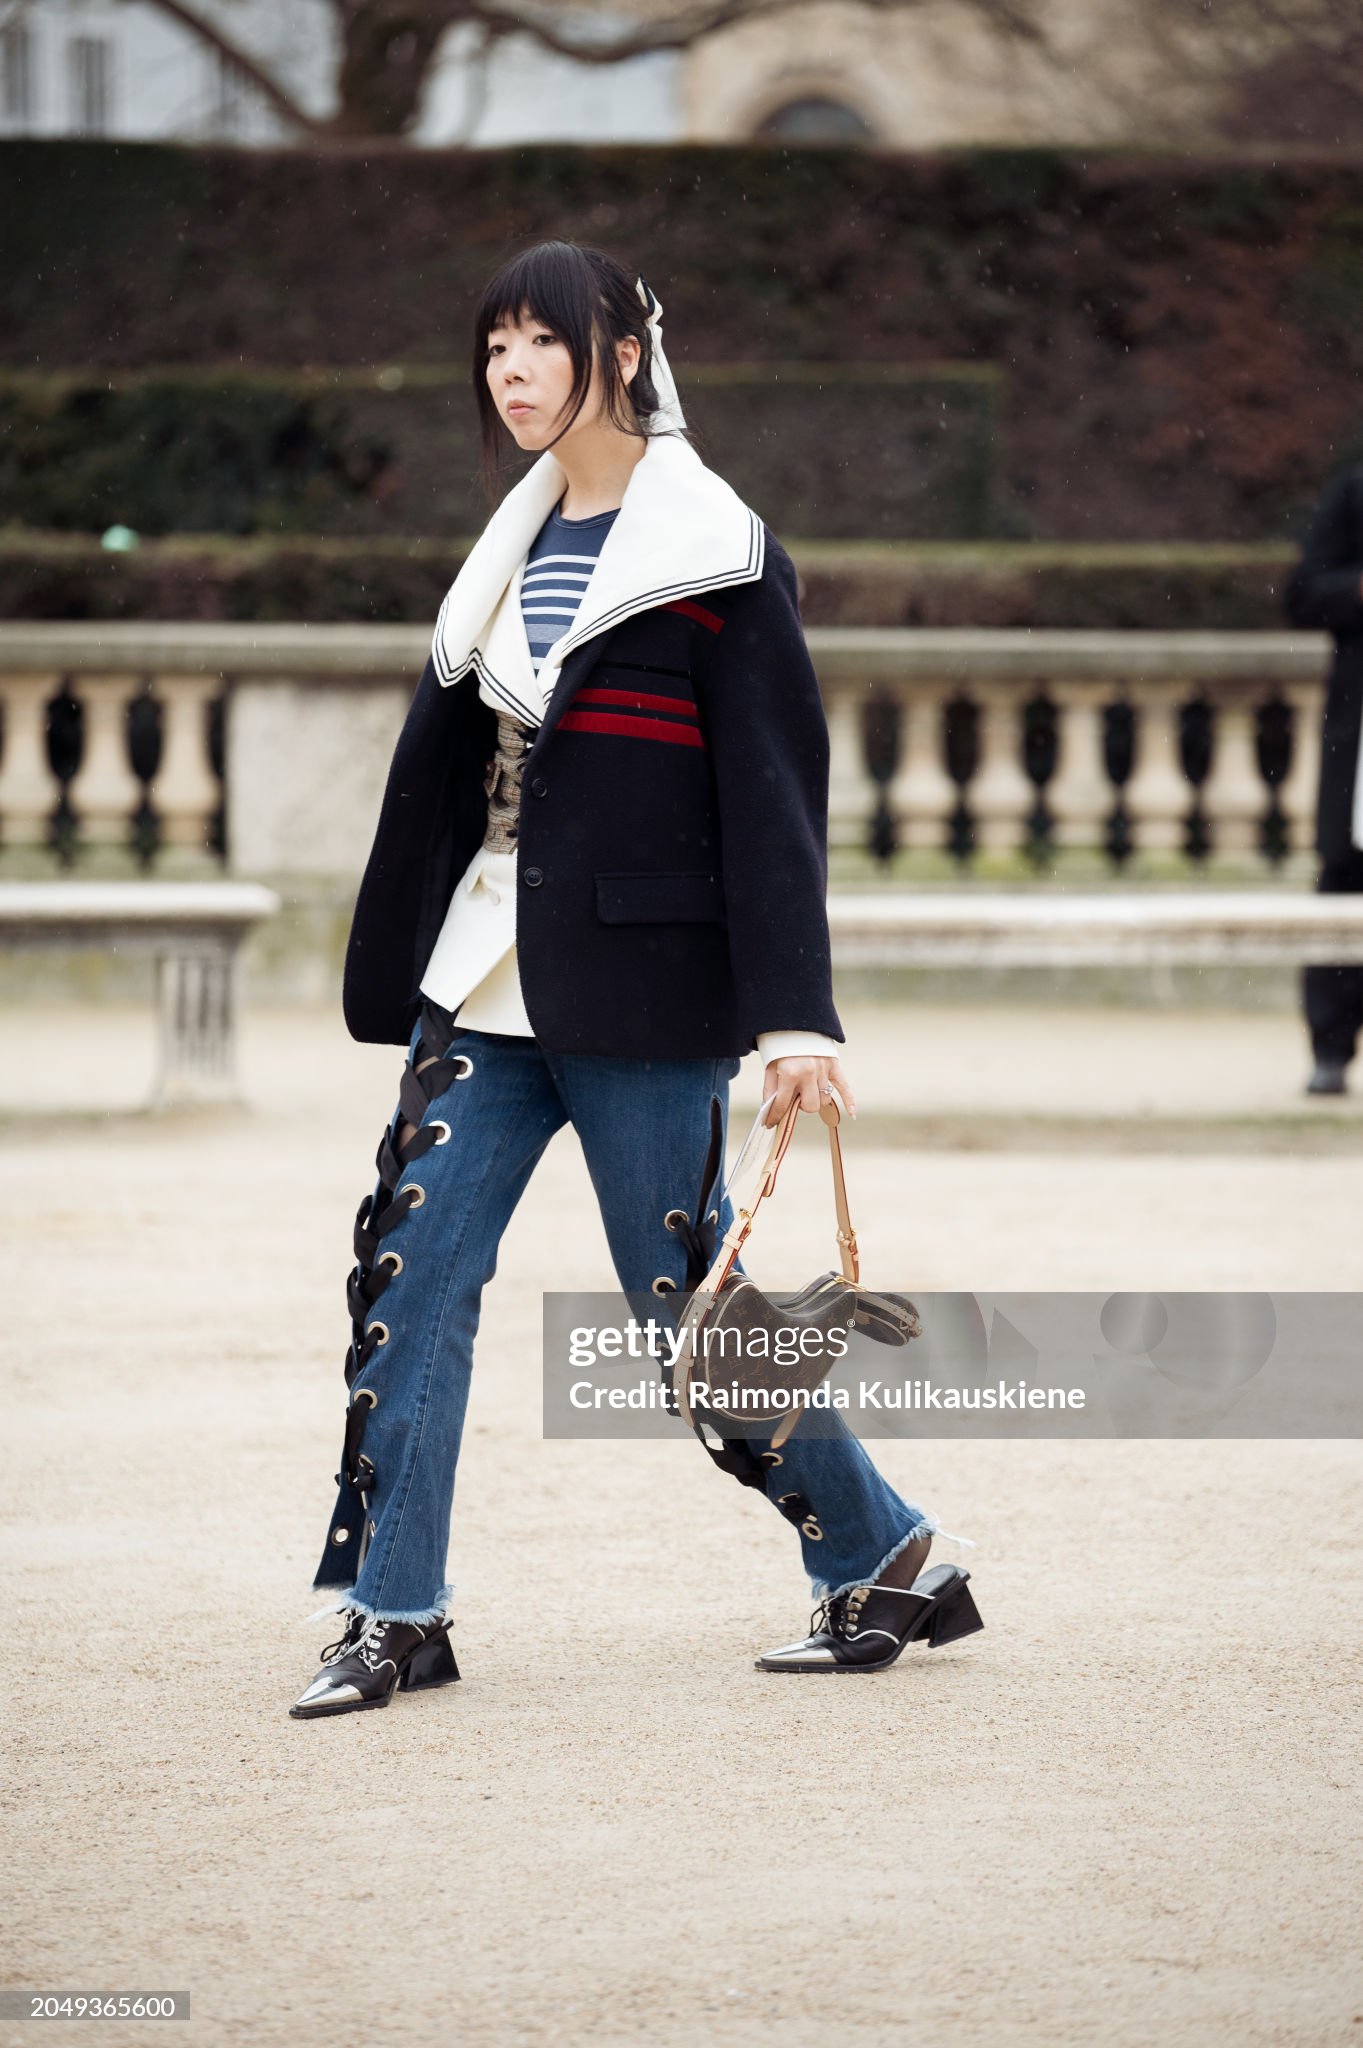 paris-france-susie-lau-wears-blue-jeans-with-ties-blue-and-white-top-black-white-and-red.jpg